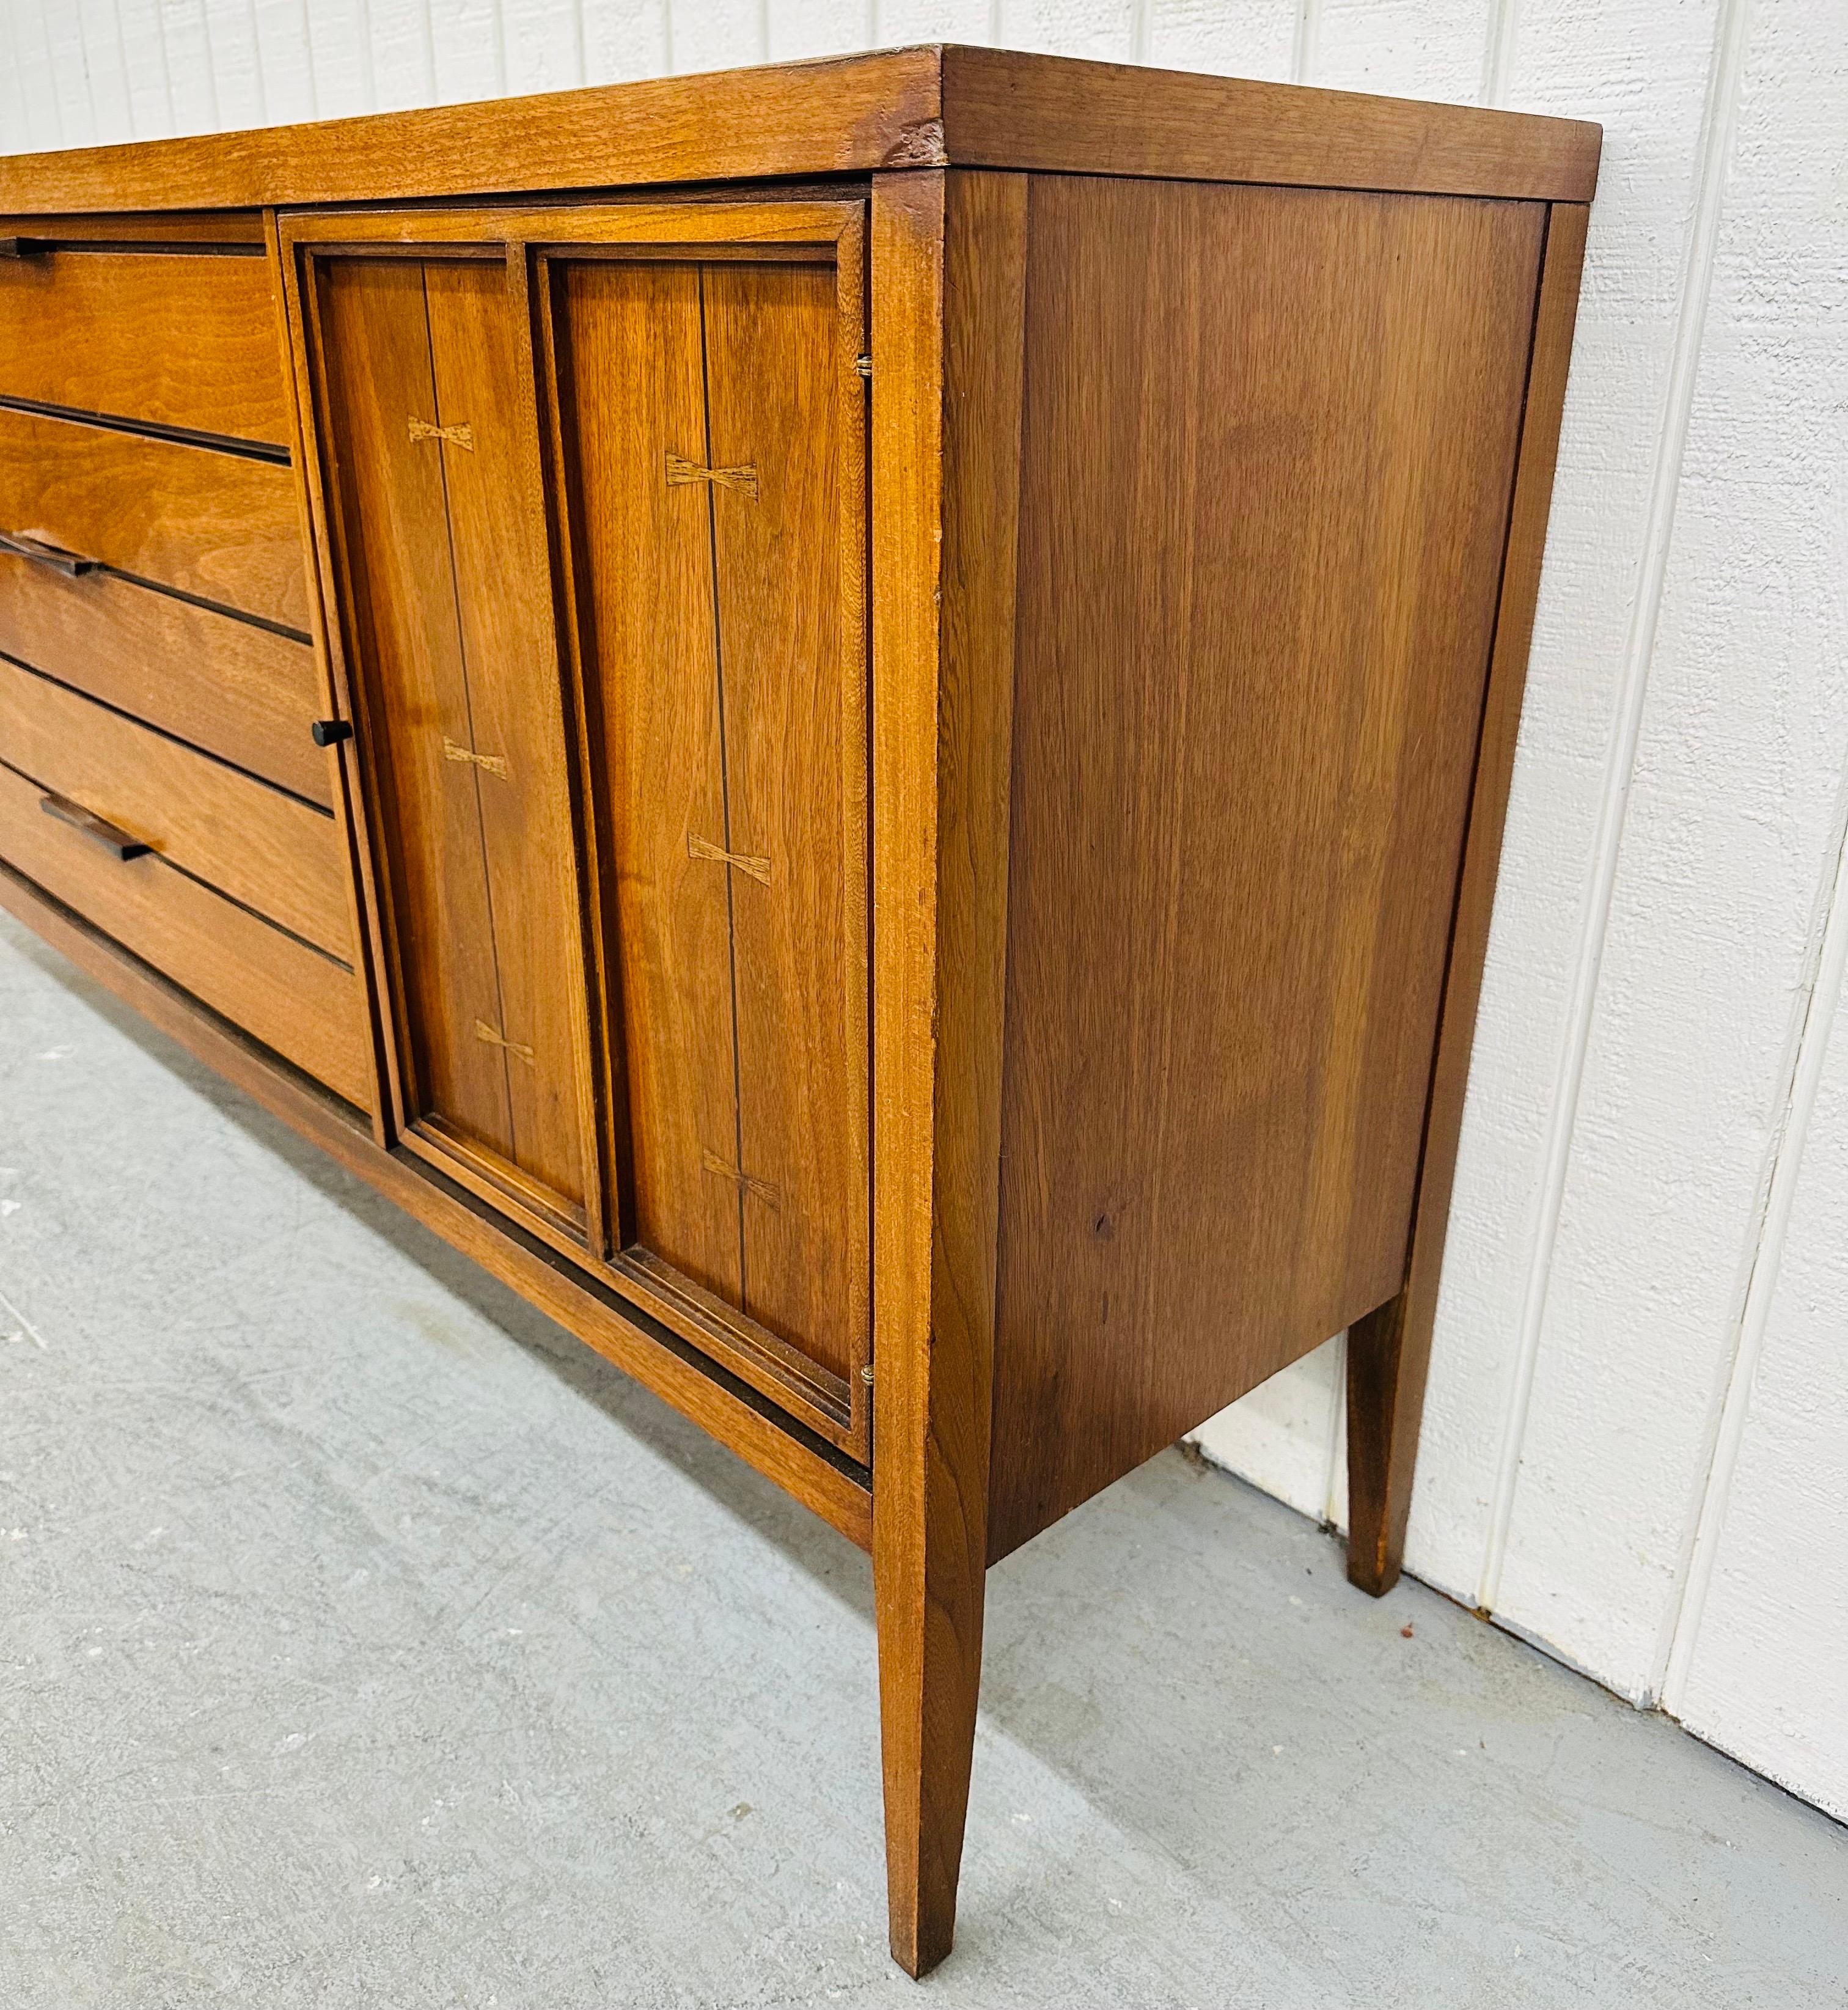 This listing is for a Mid-Century Modern Lane Tuxedo Walnut Sideboard. Featuring a straight line design, doors on each end that open up to fixed shelving space, three center drawers, original black hardware, tuxedo inlays, and a beautiful walnut